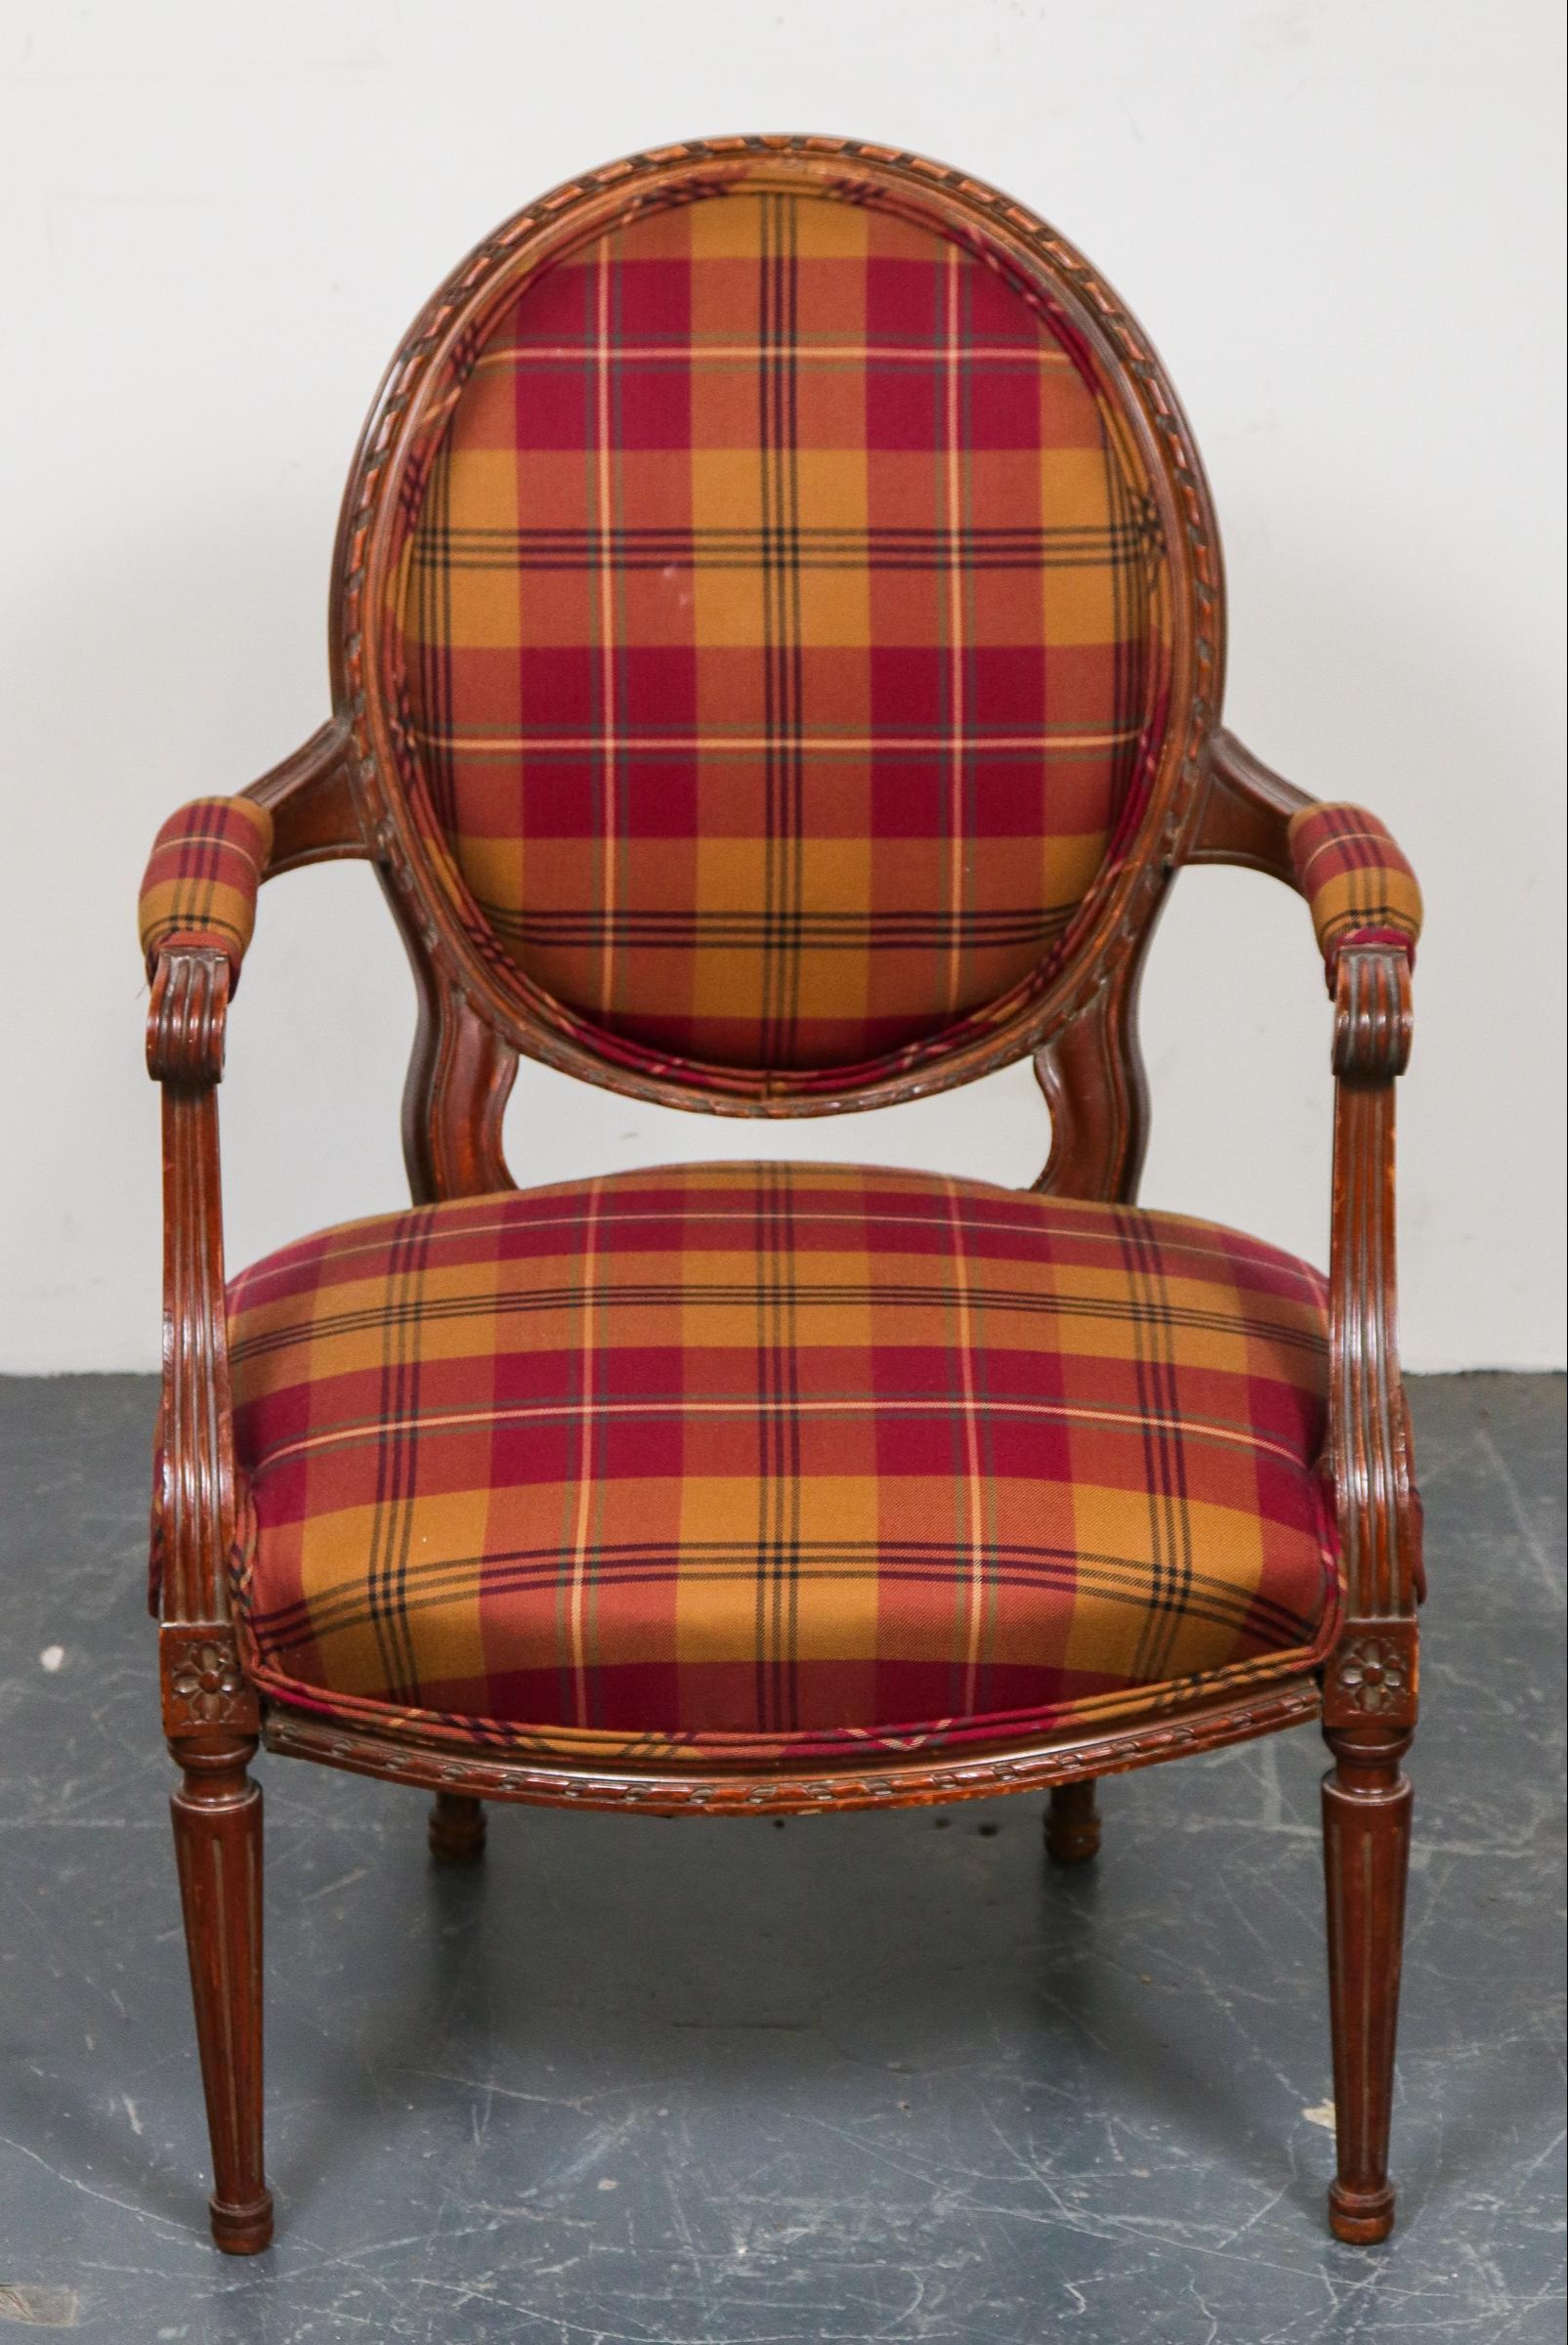 FRENCH PLAID UPHOLSTERED FAUTEUIL 3c3627